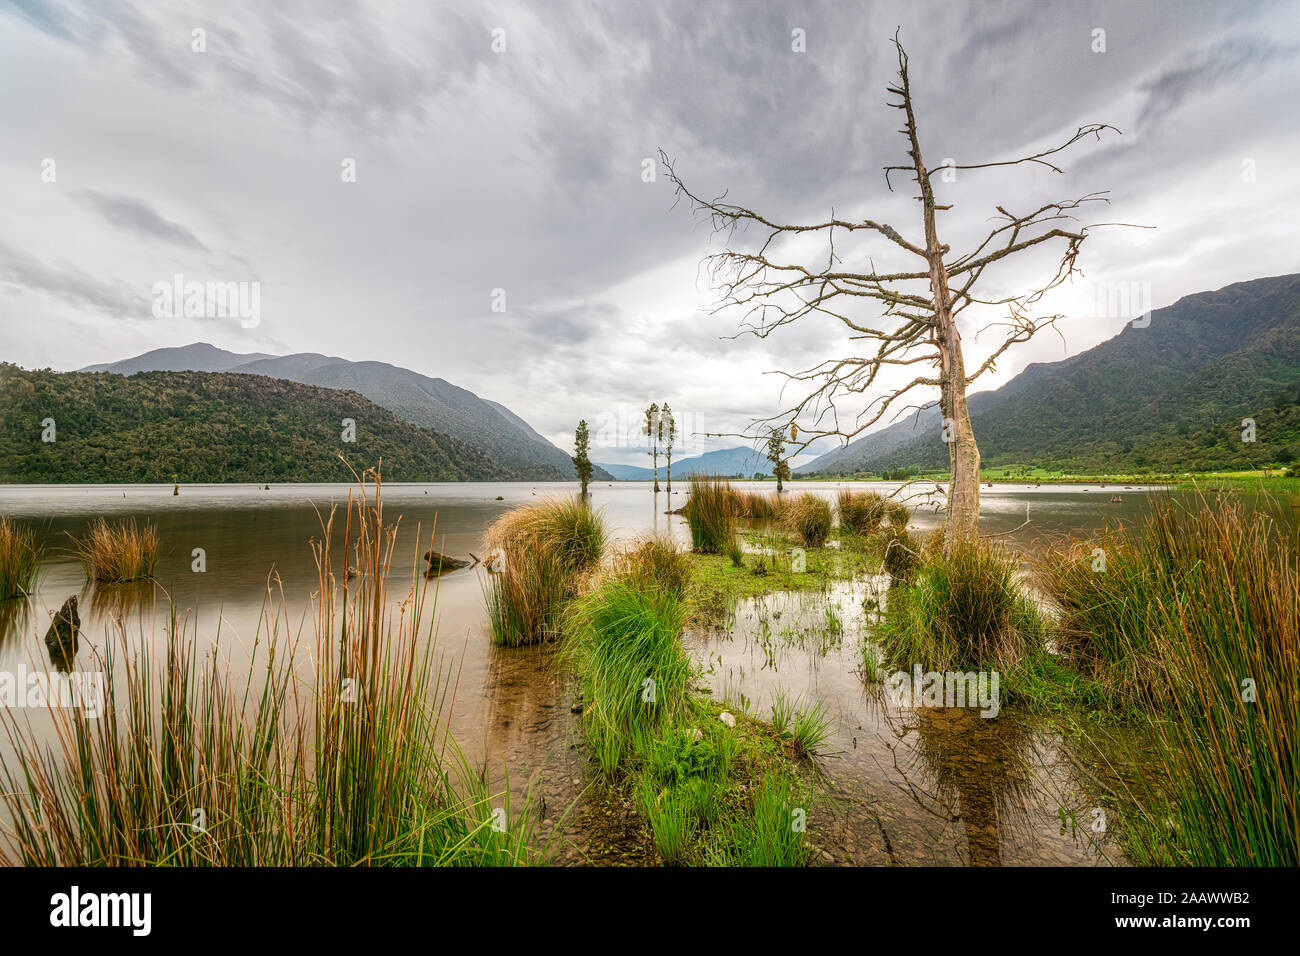 New Zealand, South Island, Grass growing on shore of Lake Poerua with forested hills in background Stock Photo